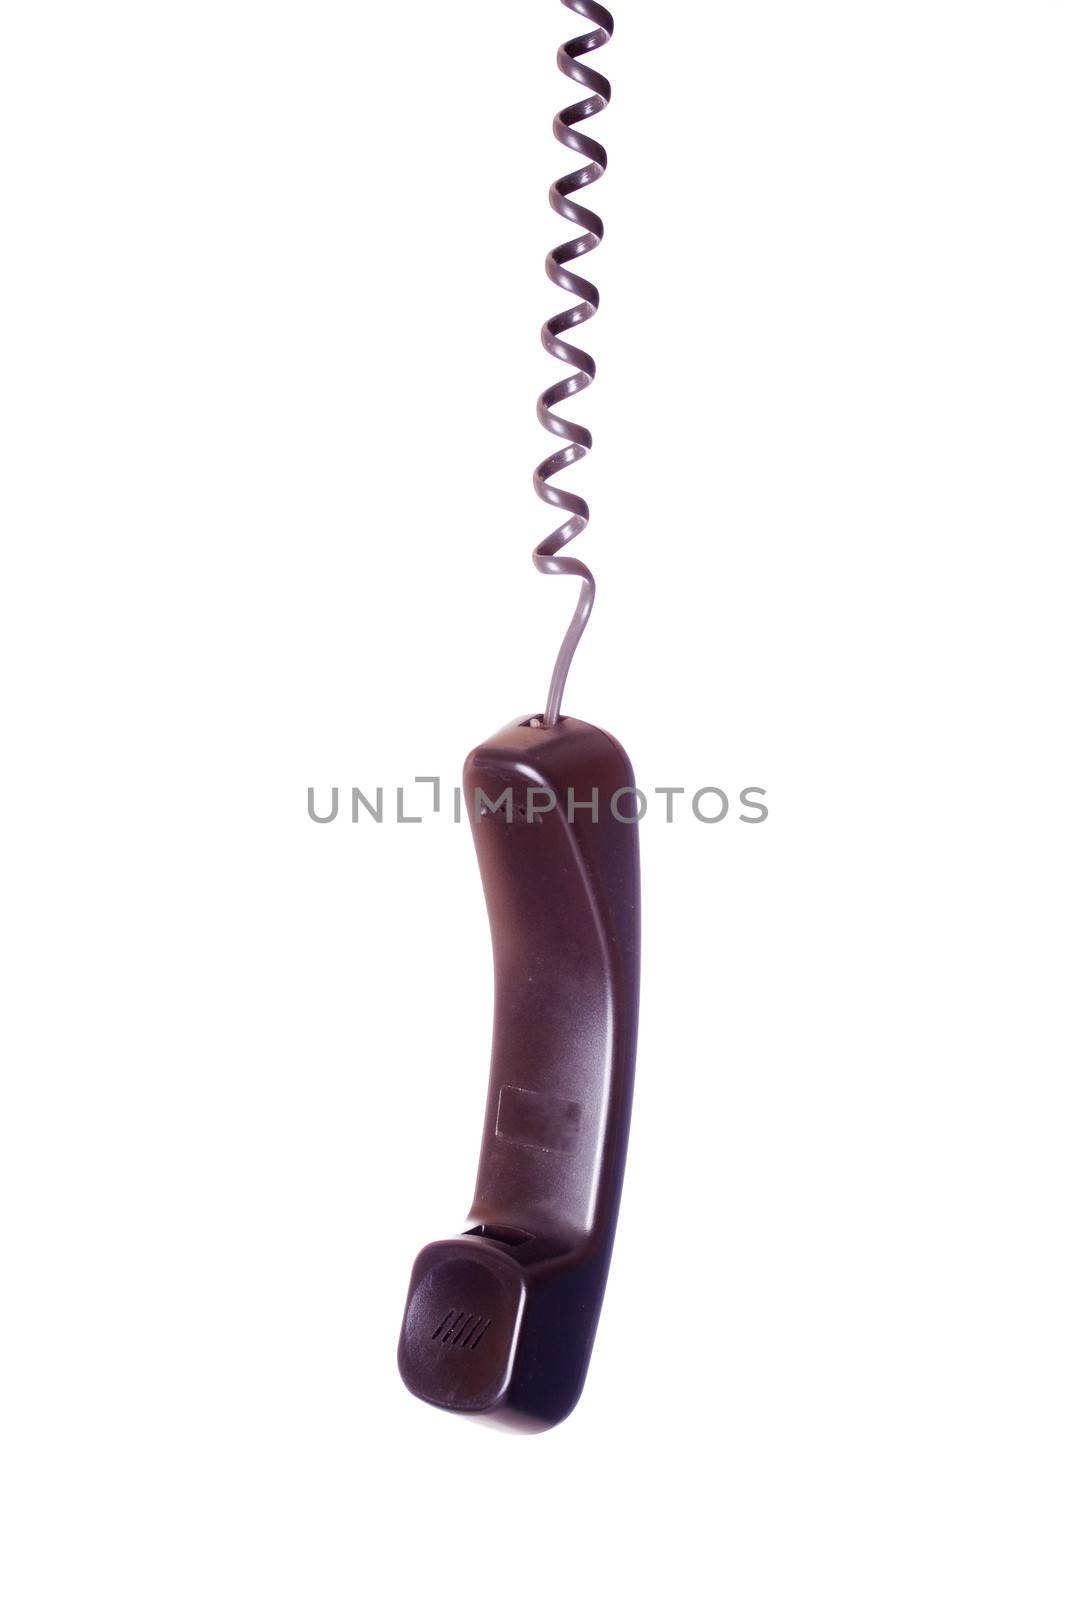 A telephone receiver isolated on a white background.